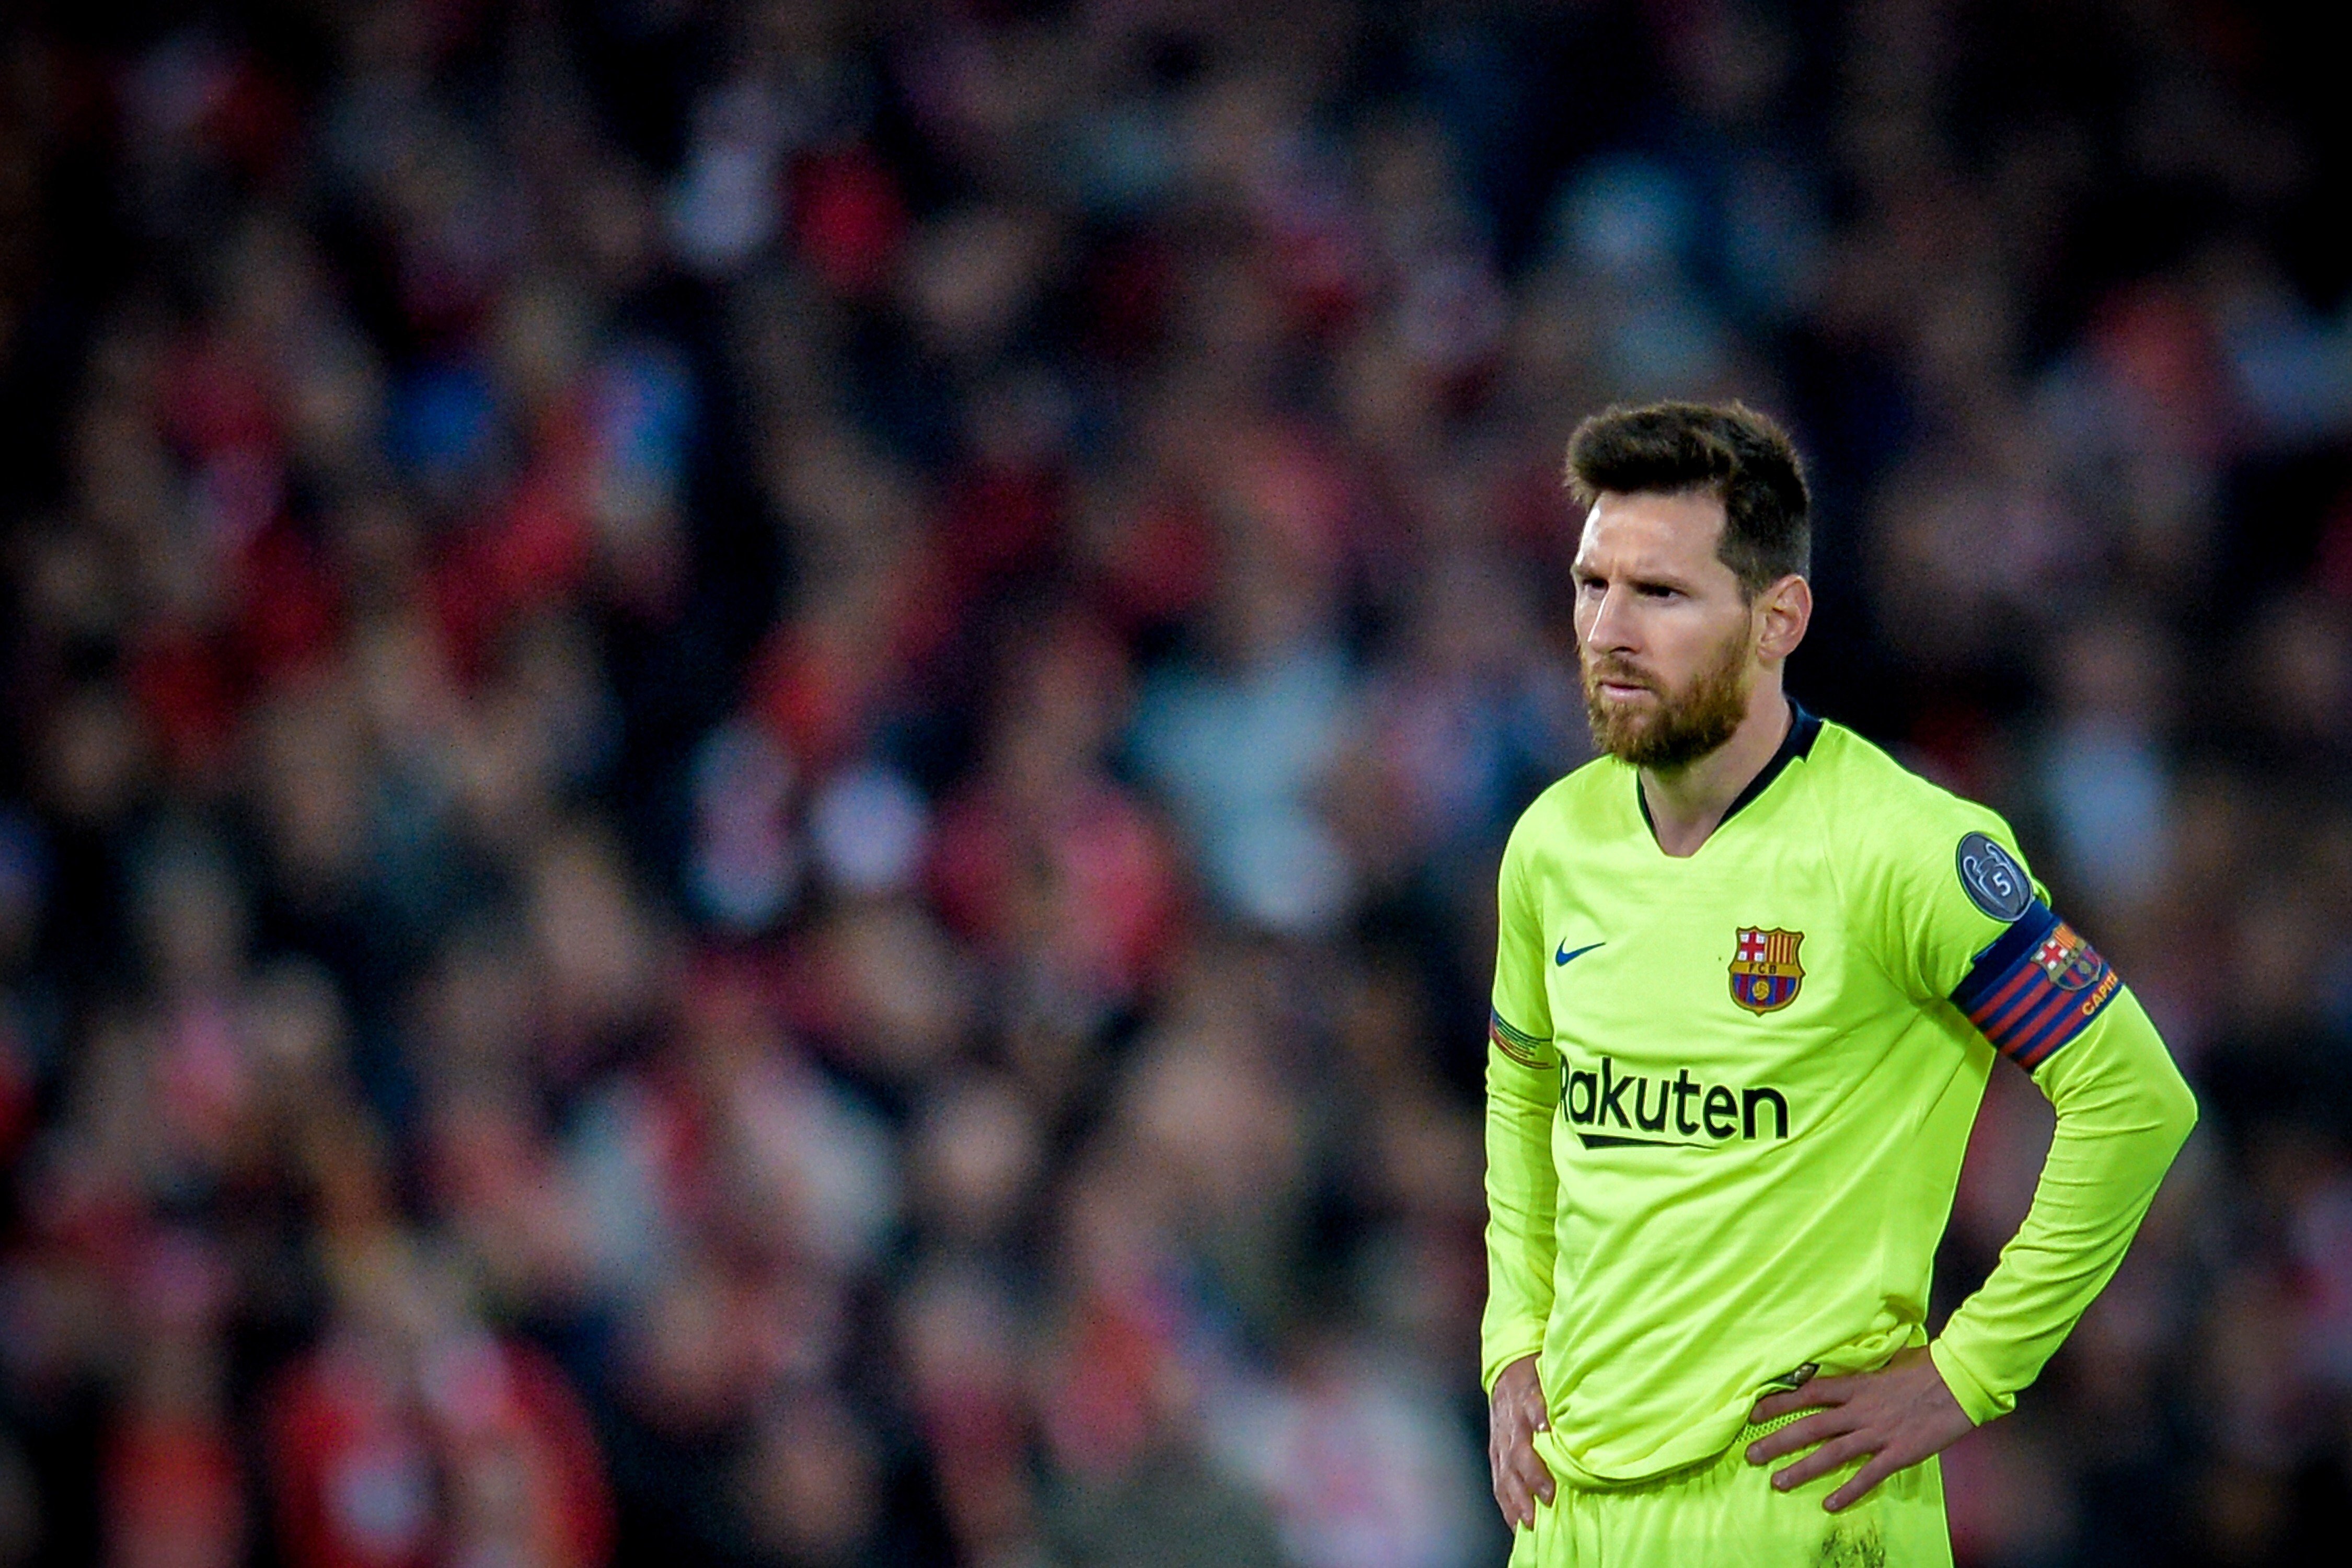 Barcelona's Lionel Messi reacts during the UEFA Champions League semi-final second leg defeat to Liverpool in 2019. Photo: EPA